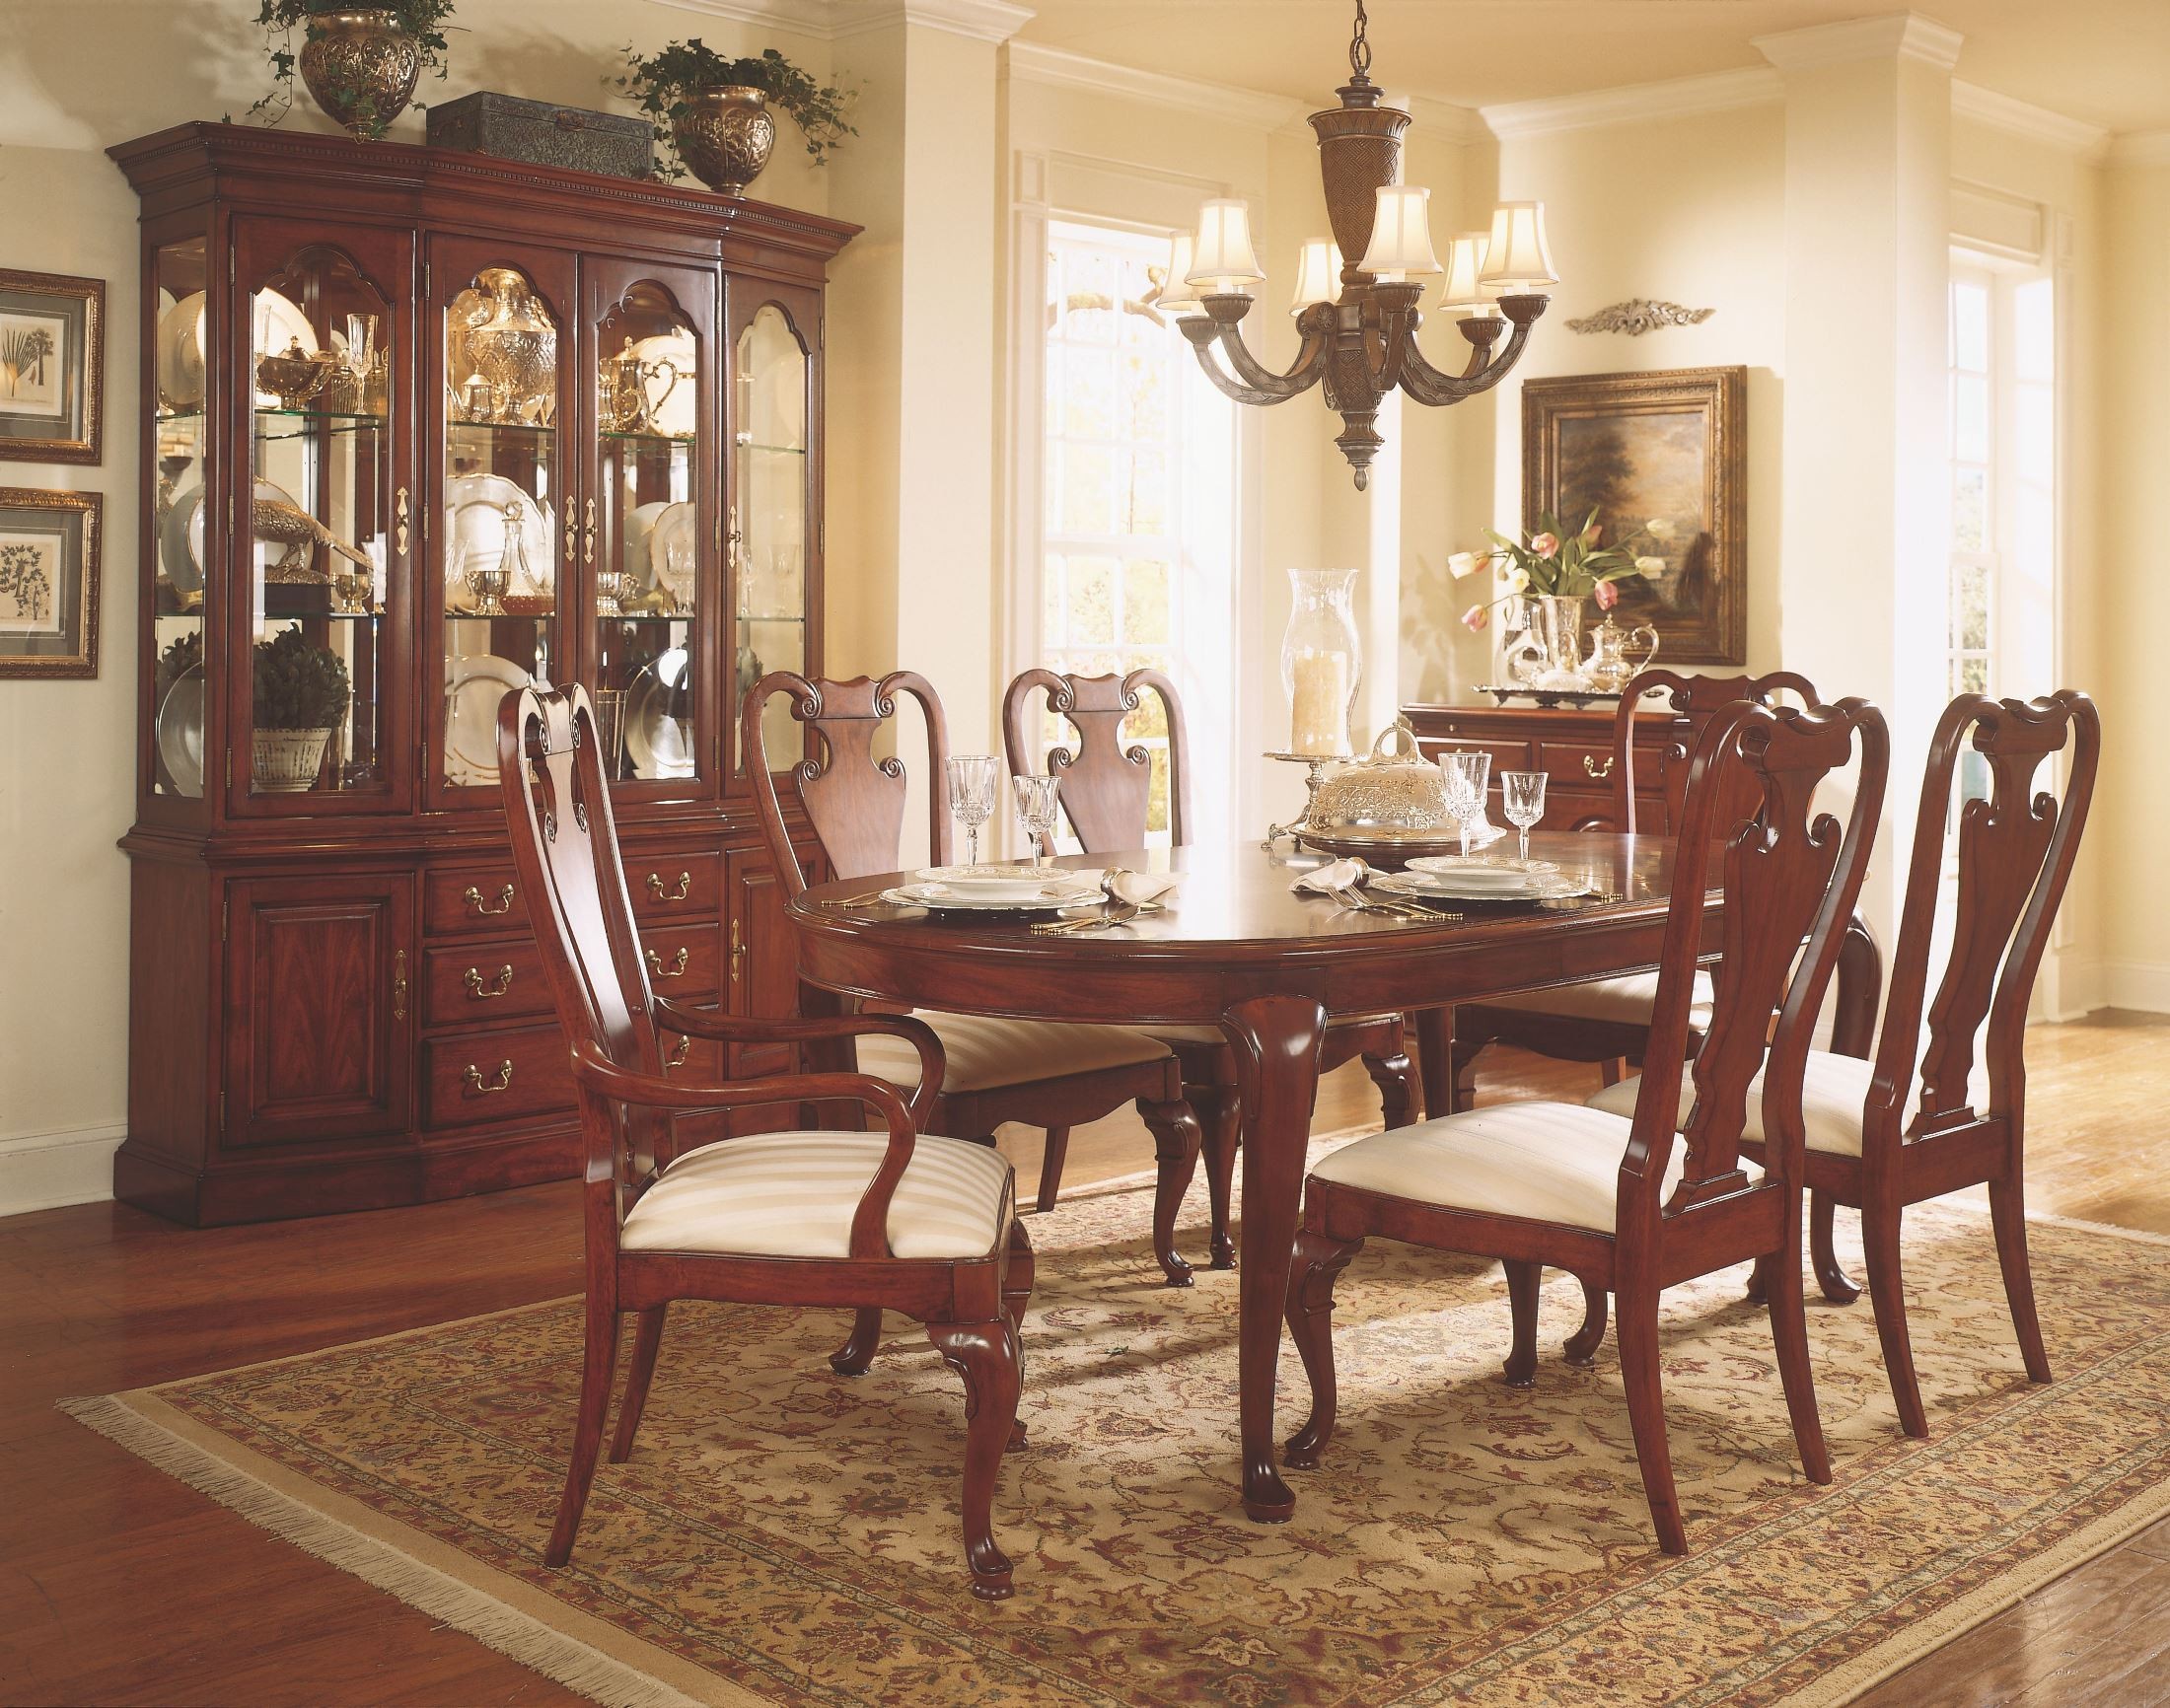 Cherry Dining Room Sets For Sale